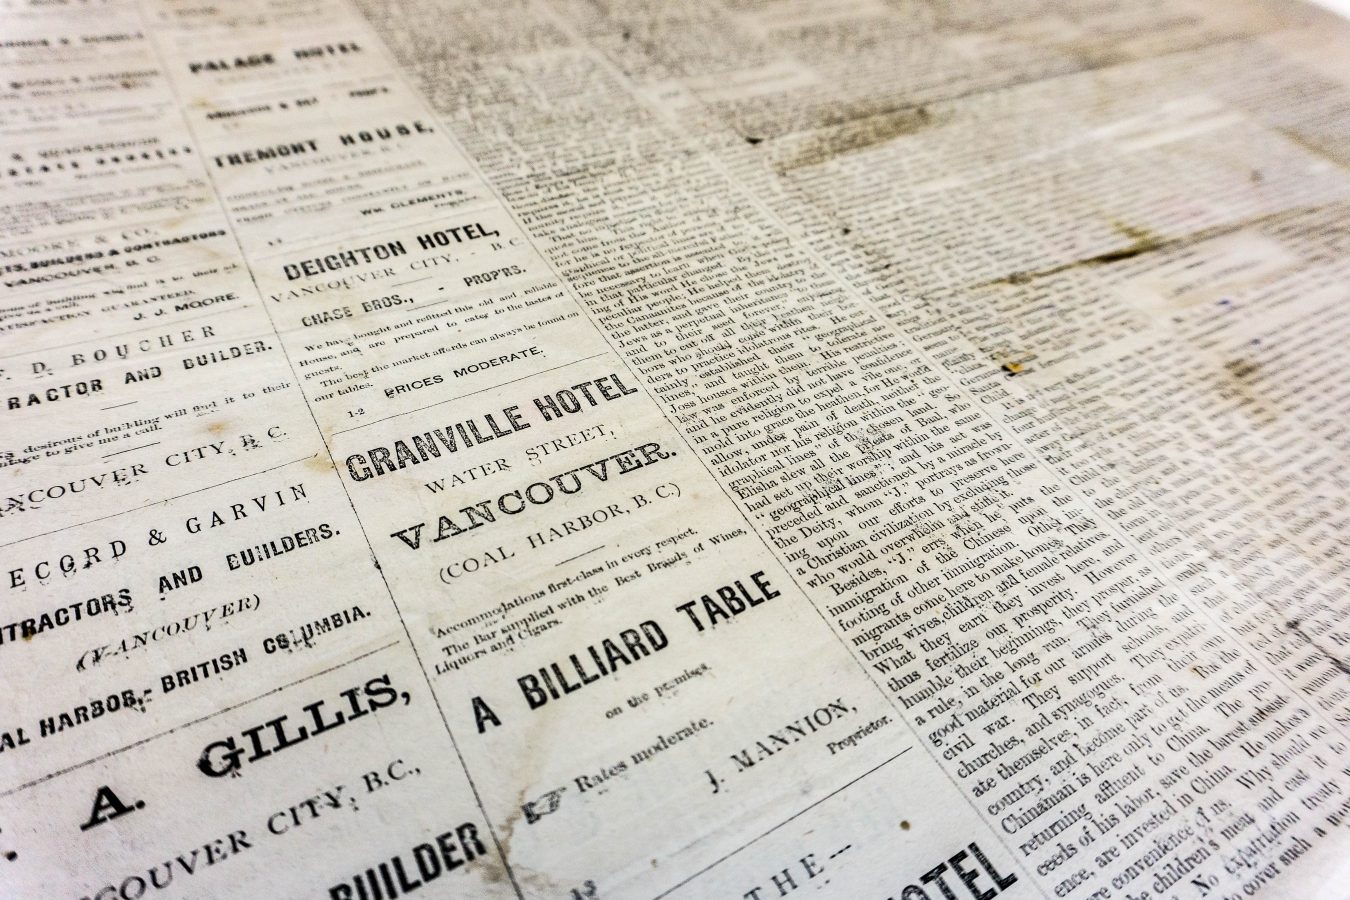 Vancouver's First Newspaper